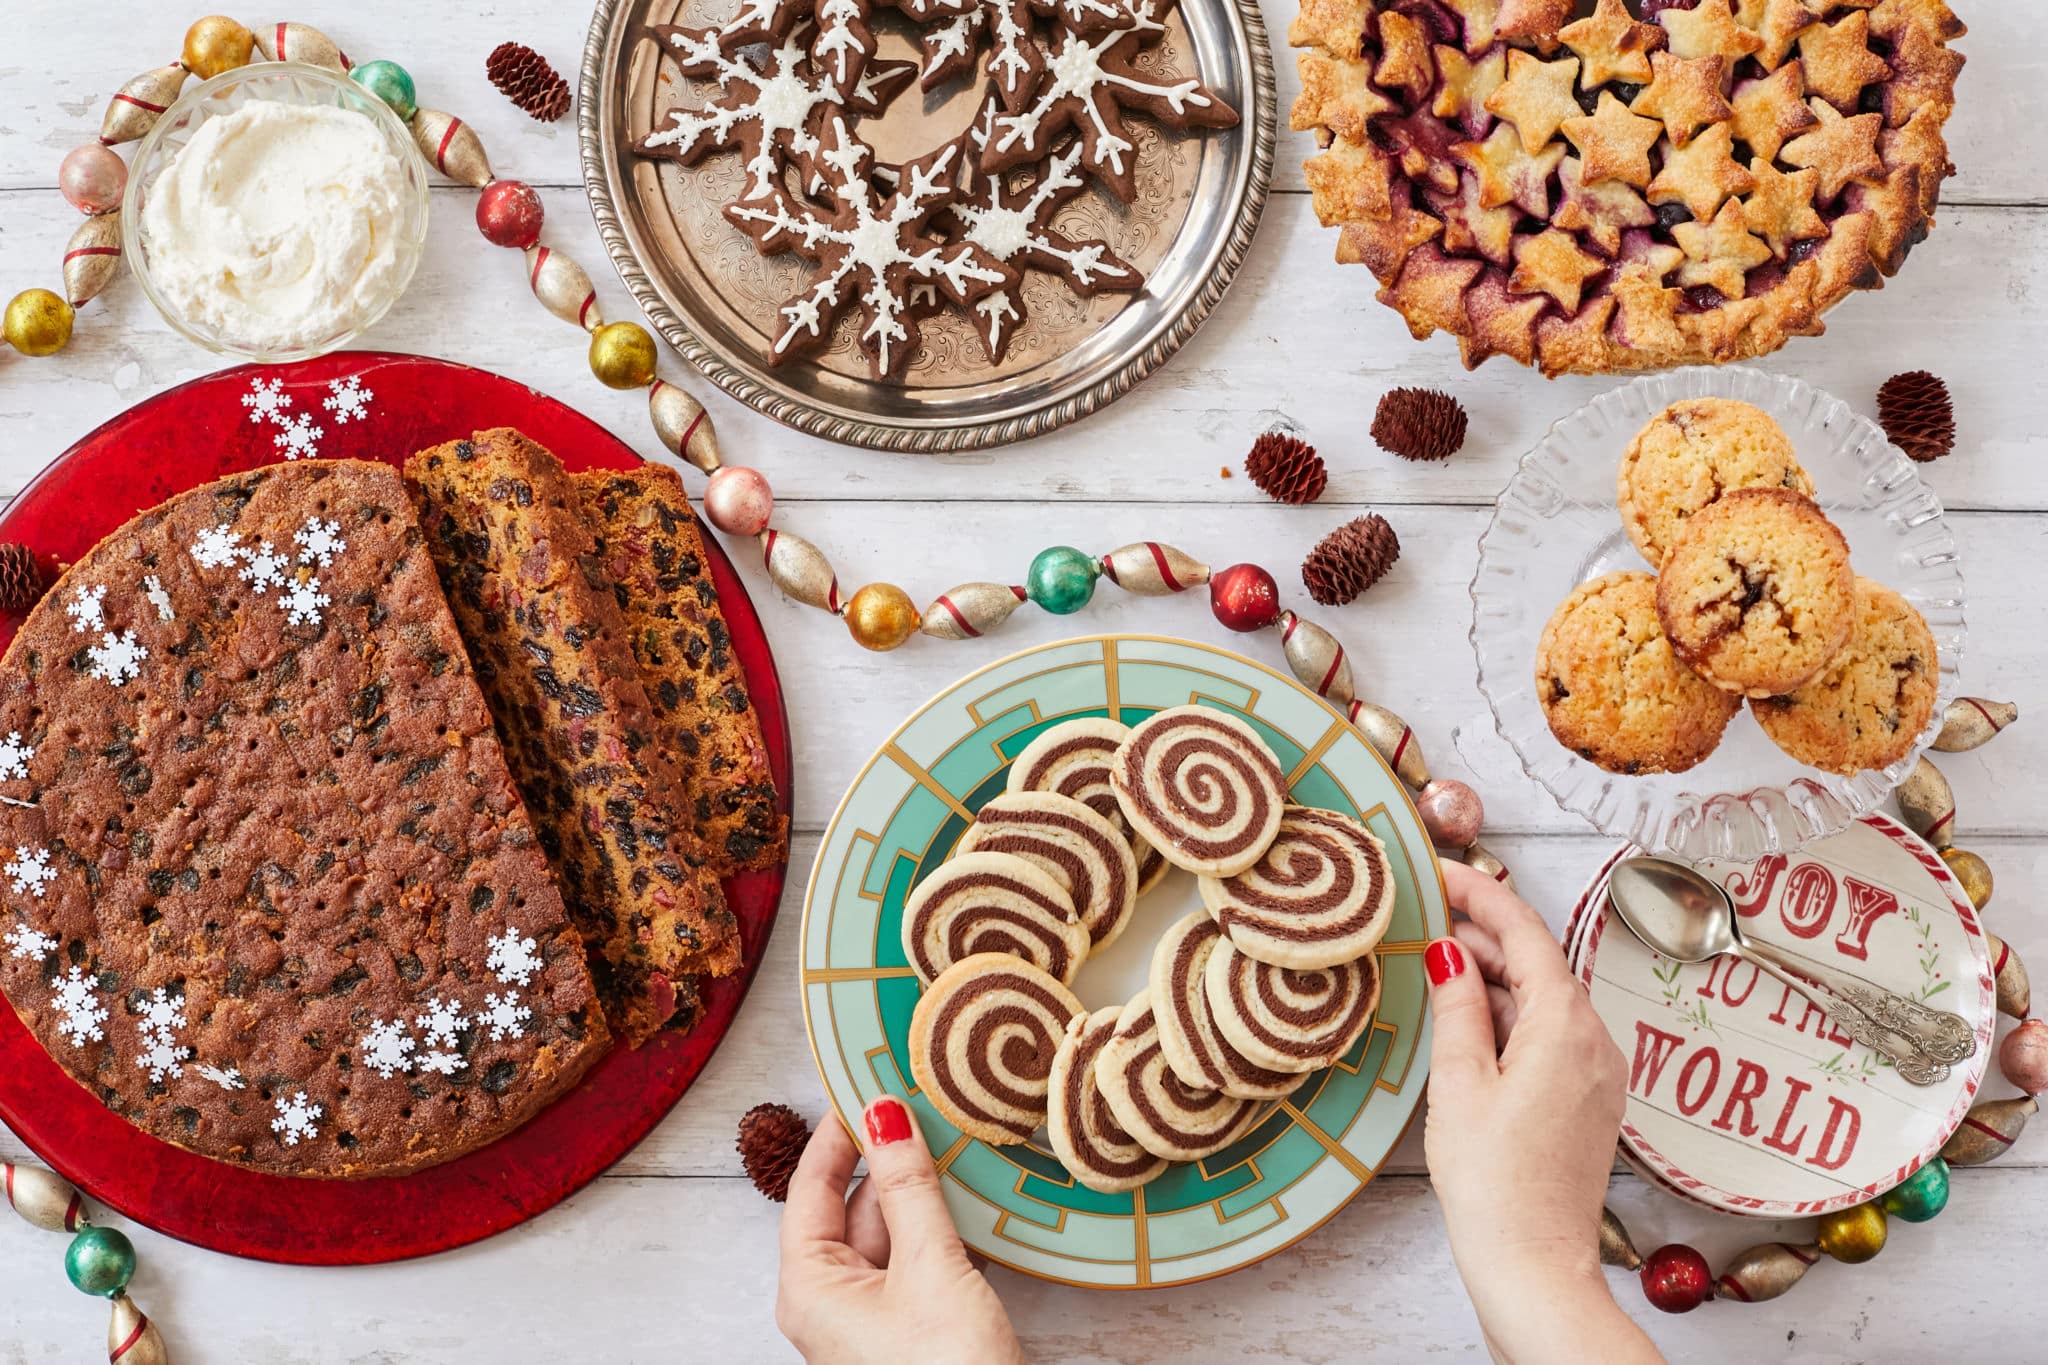 A table full of holiday desserts and dessert recipes.